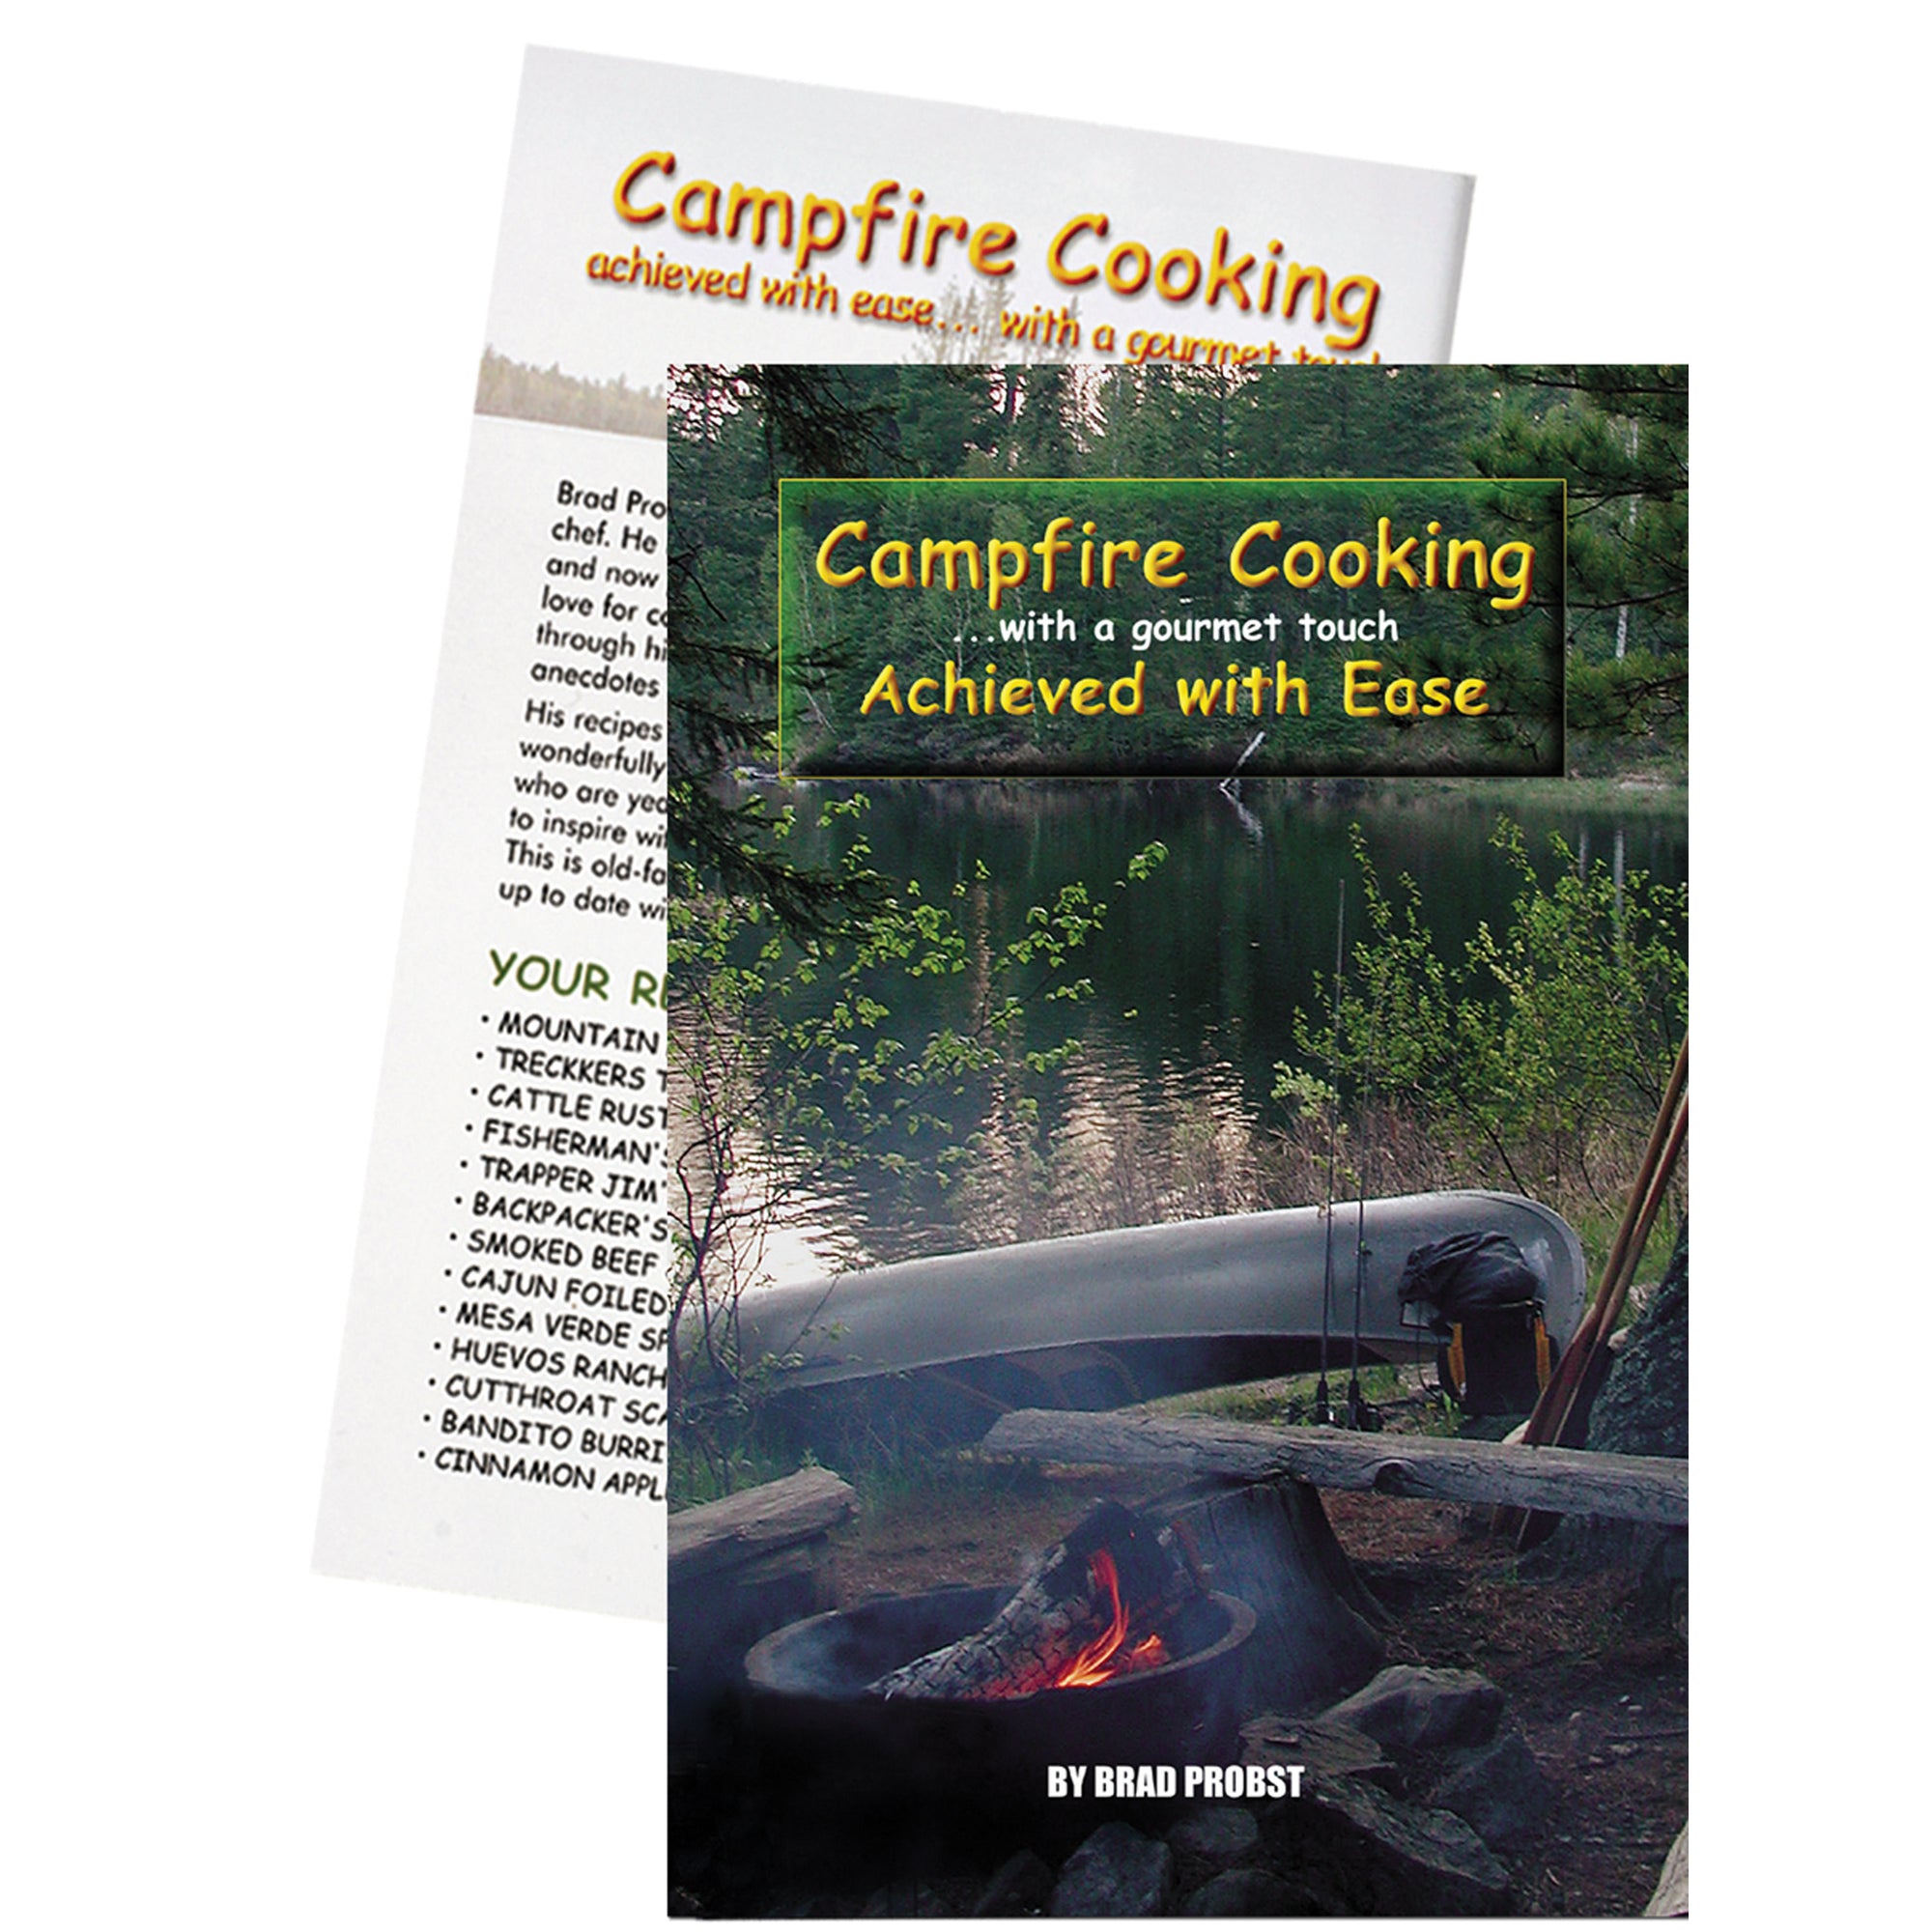 Rome Industries Inc 2012 Campfire Cooking Book